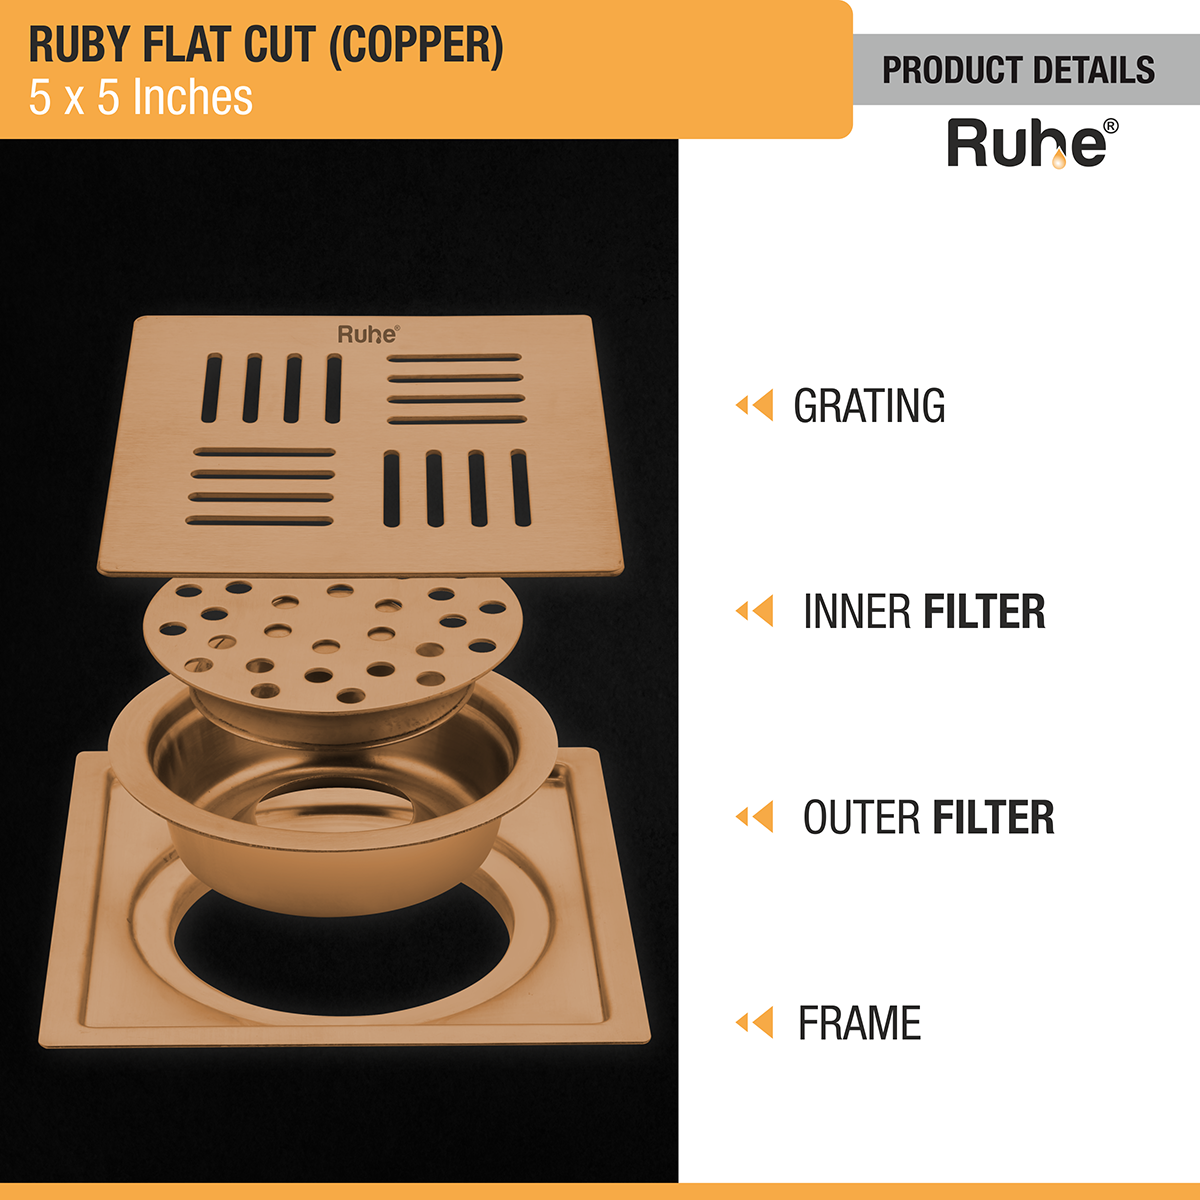 Ruby Square Flat Cut Floor Drain in Antique Copper PVD Coating (5 x 5 Inches) product details